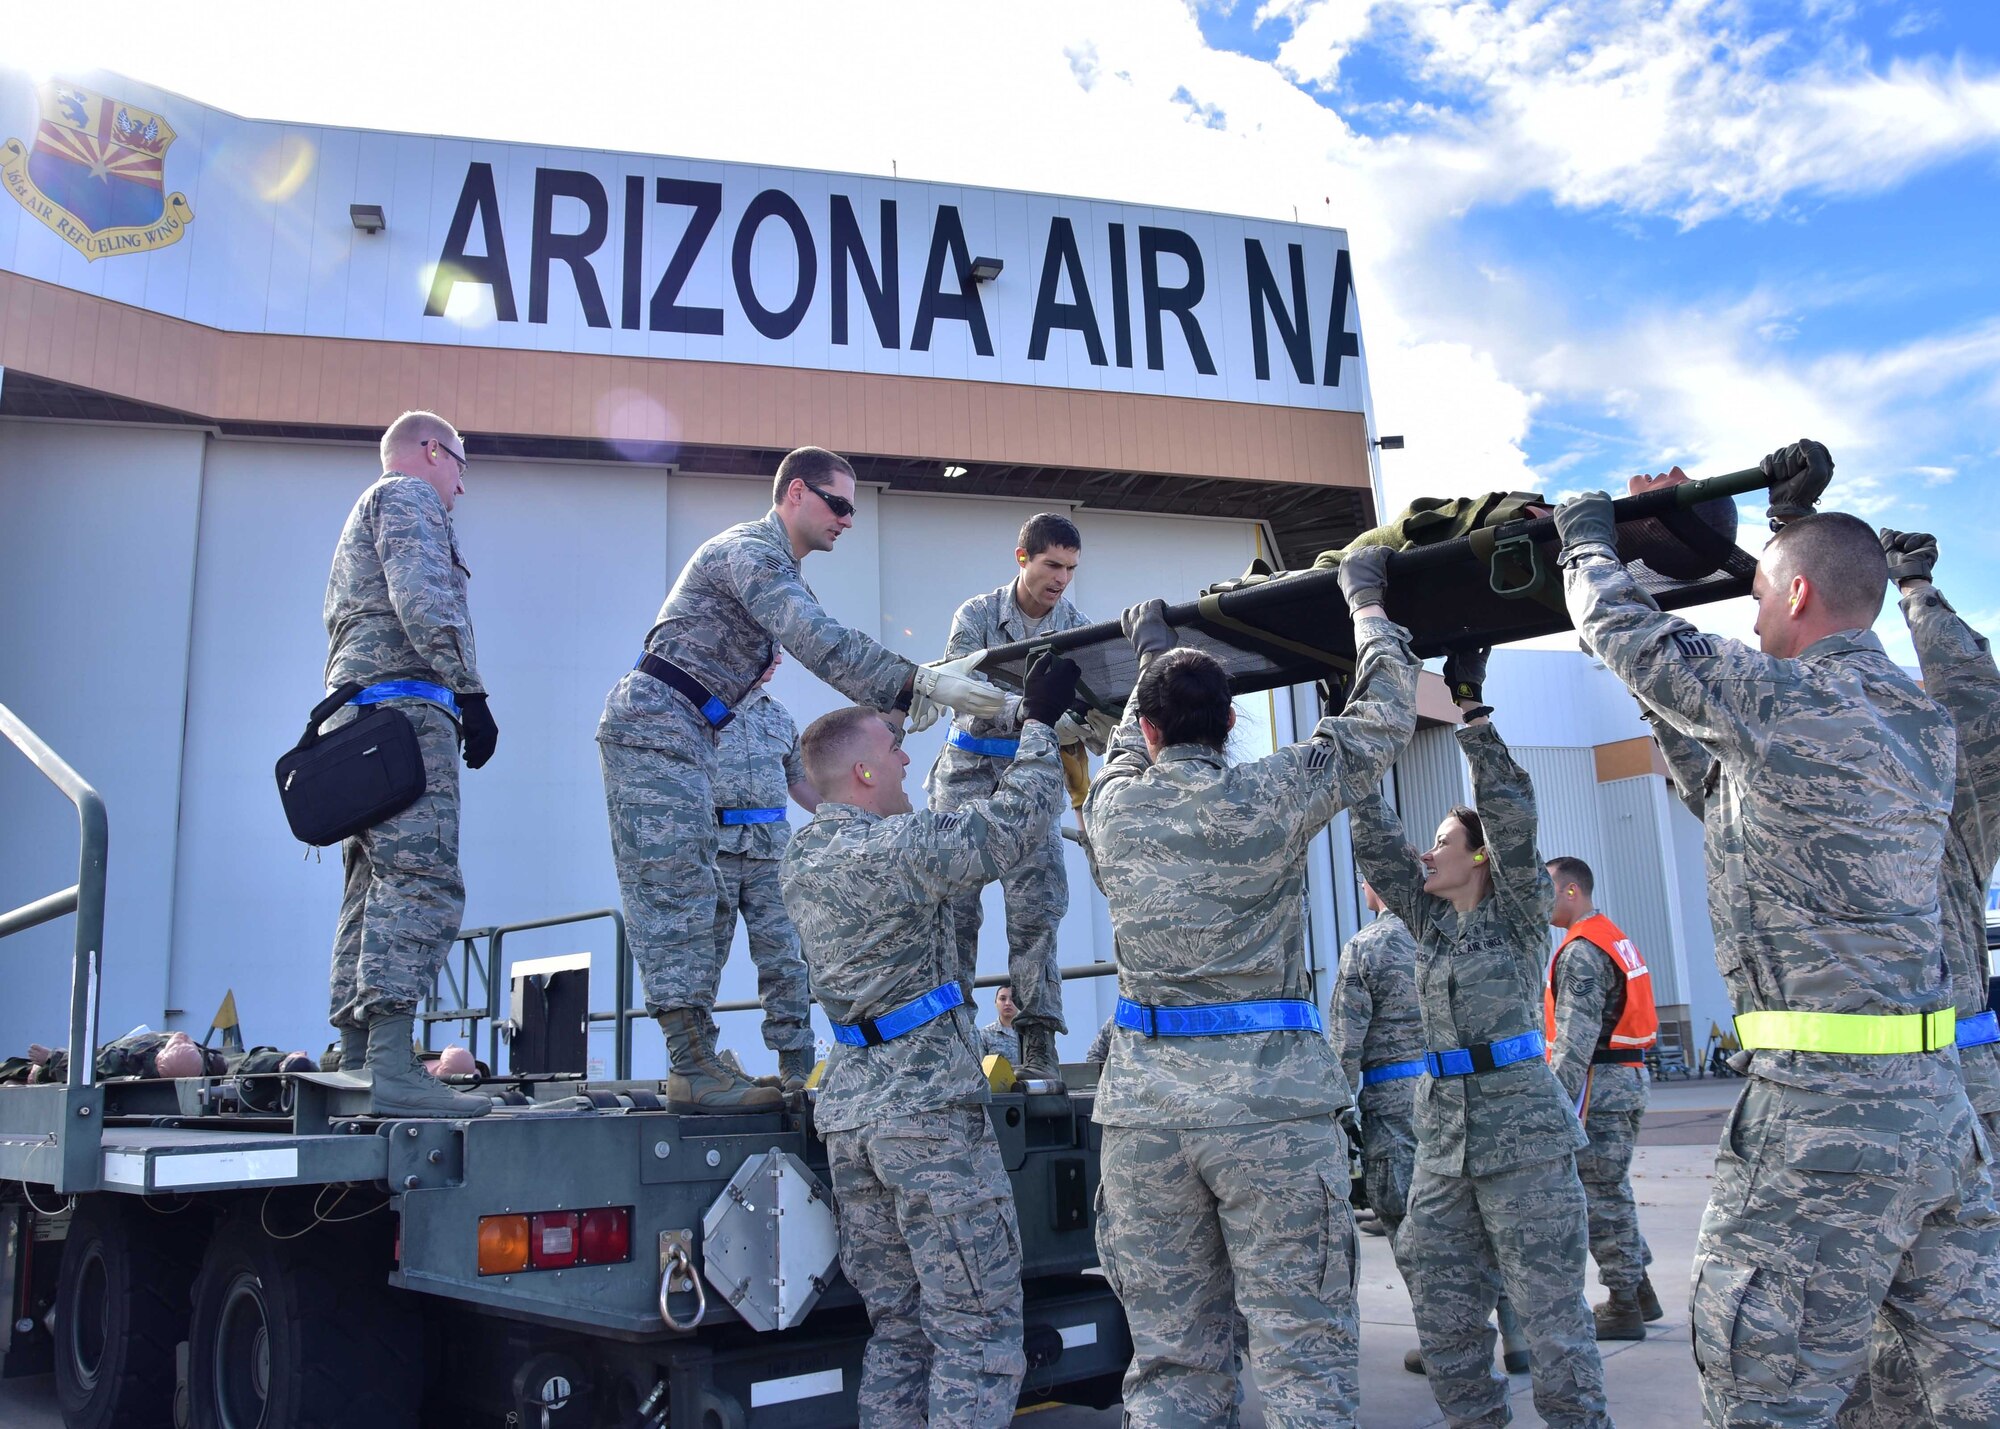 Airmen from the 944th Aeromedical Staging Squadron work together to load a simulated patient onto a K-loader Jan. 7 during a joint patient movement training exercise at Goldwater Air National Guard Base, Ariz. (U.S. Air Force photo by Tech. Sgt. Louis Vega Jr.)